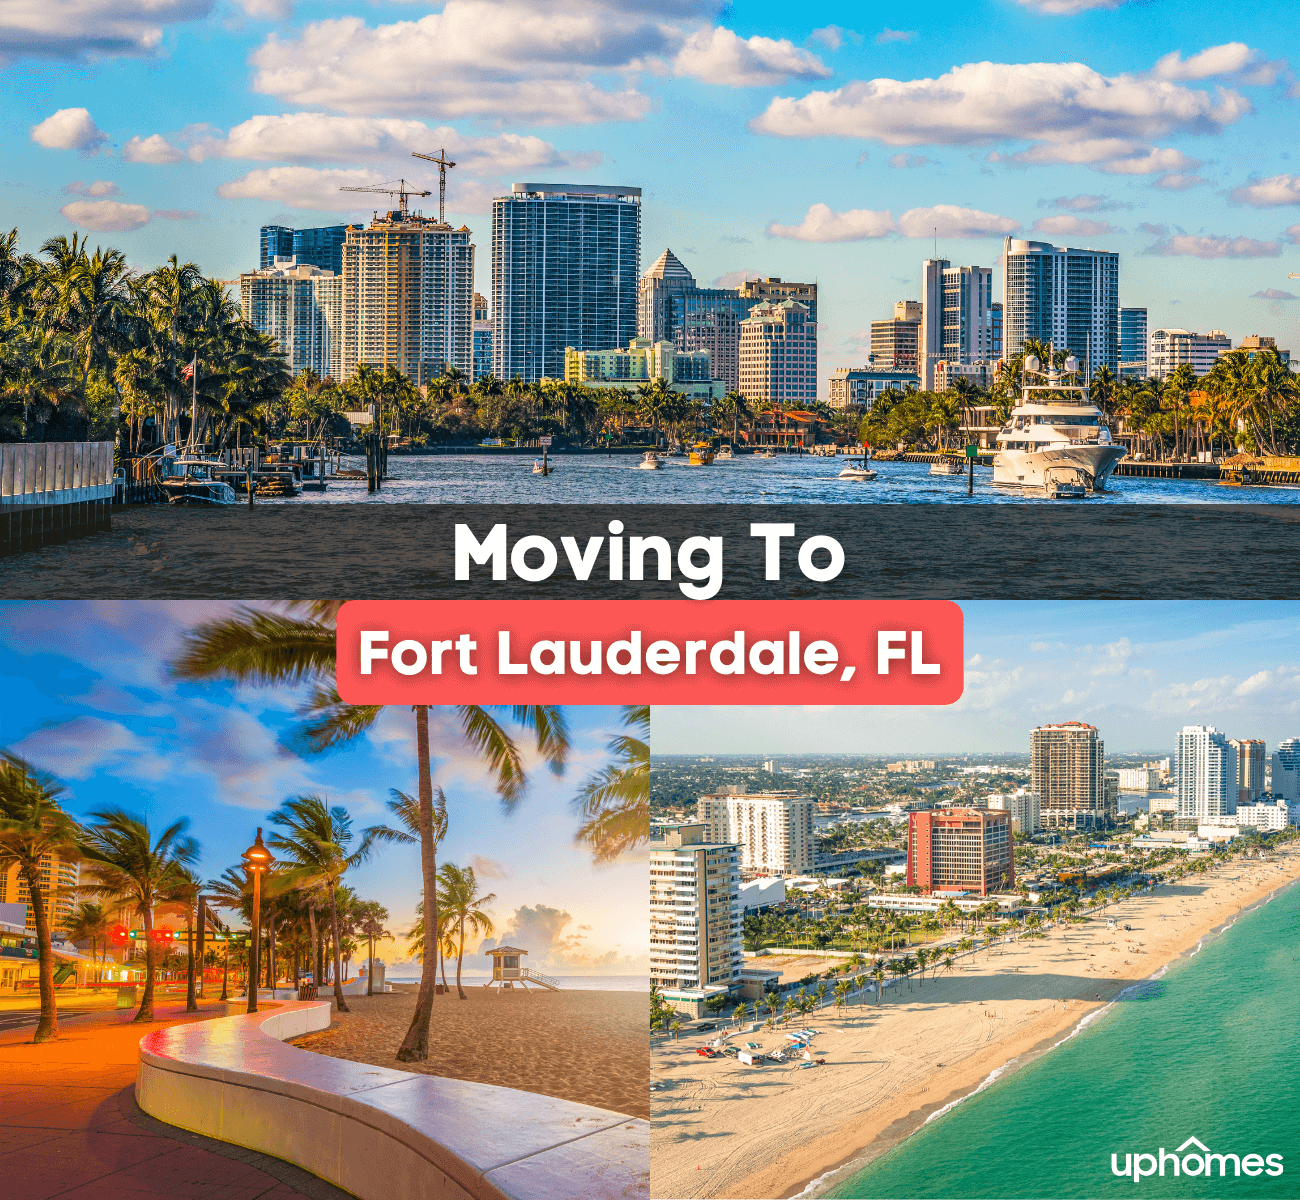 Moving to Fort Lauderdale, FL - What is it like living in Fort Lauderdale, Florida?